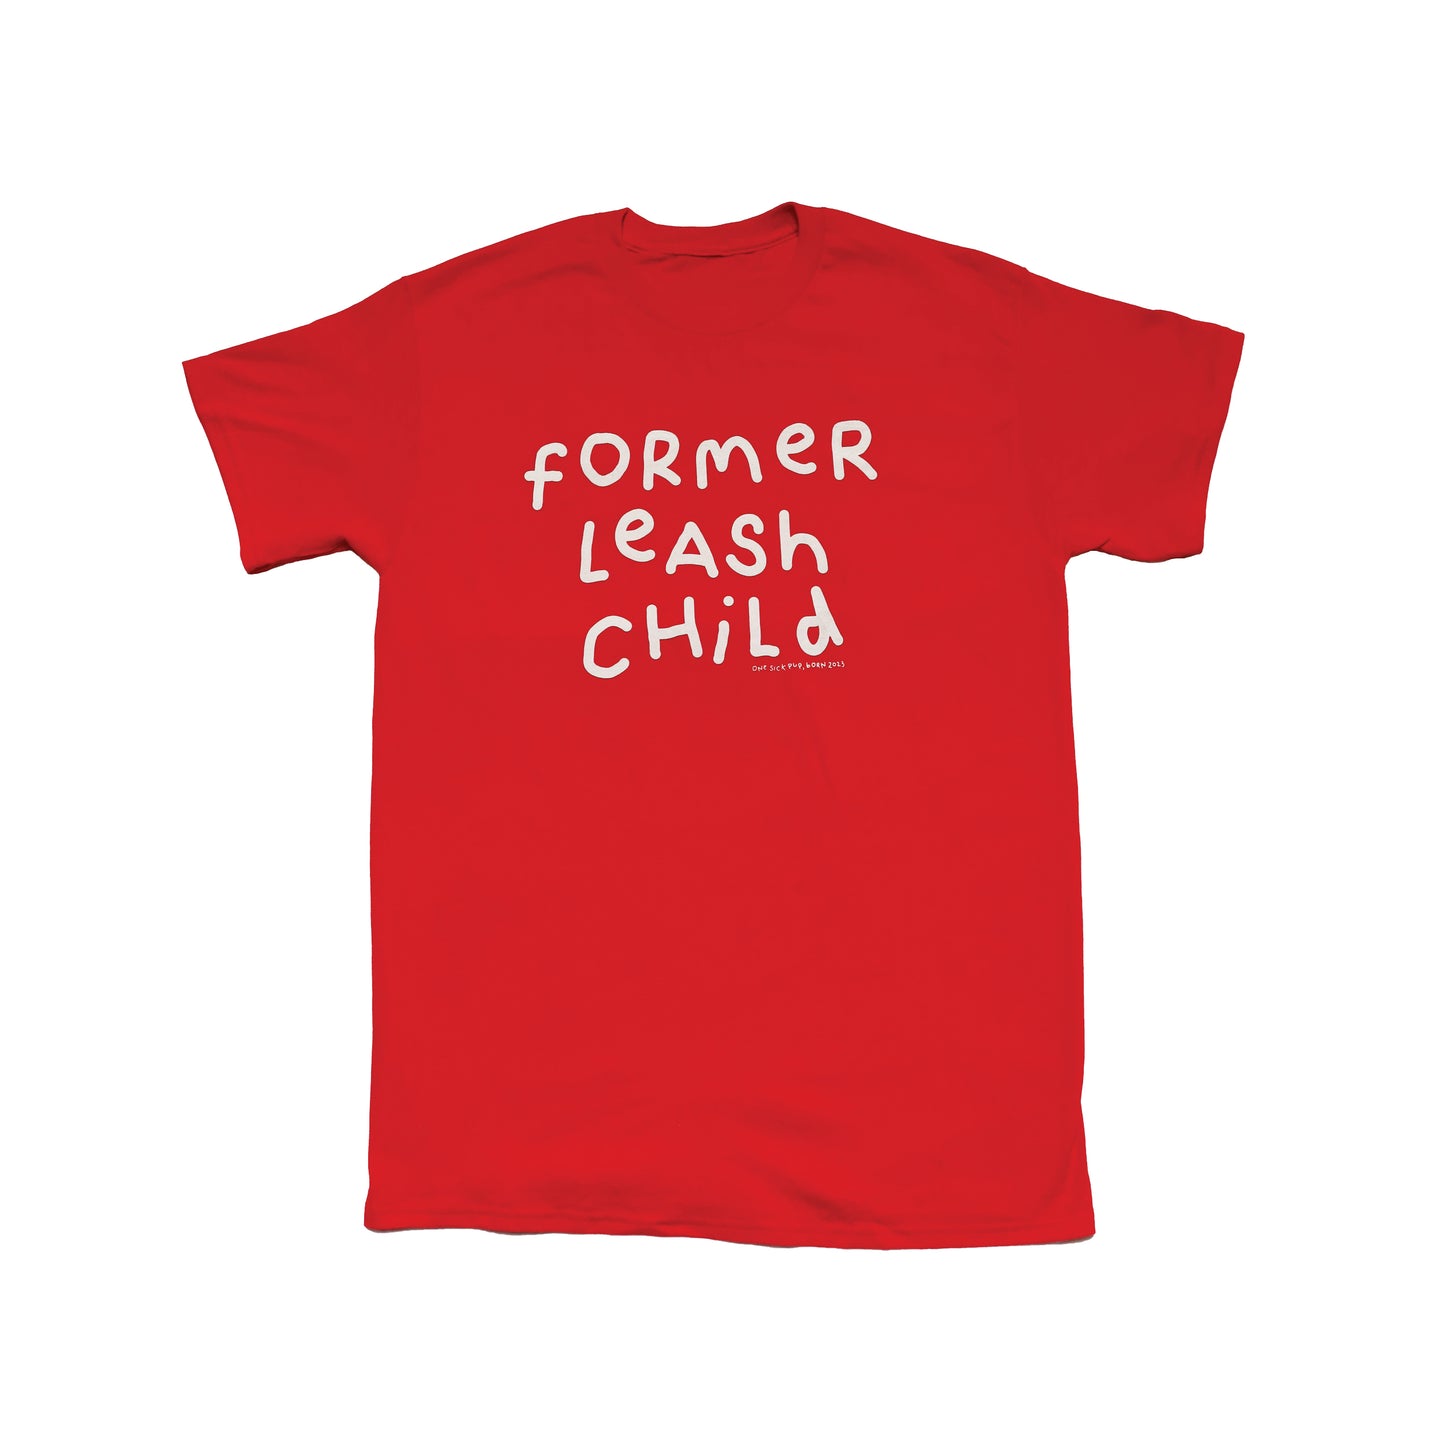 Former Leash Child Tee - Red